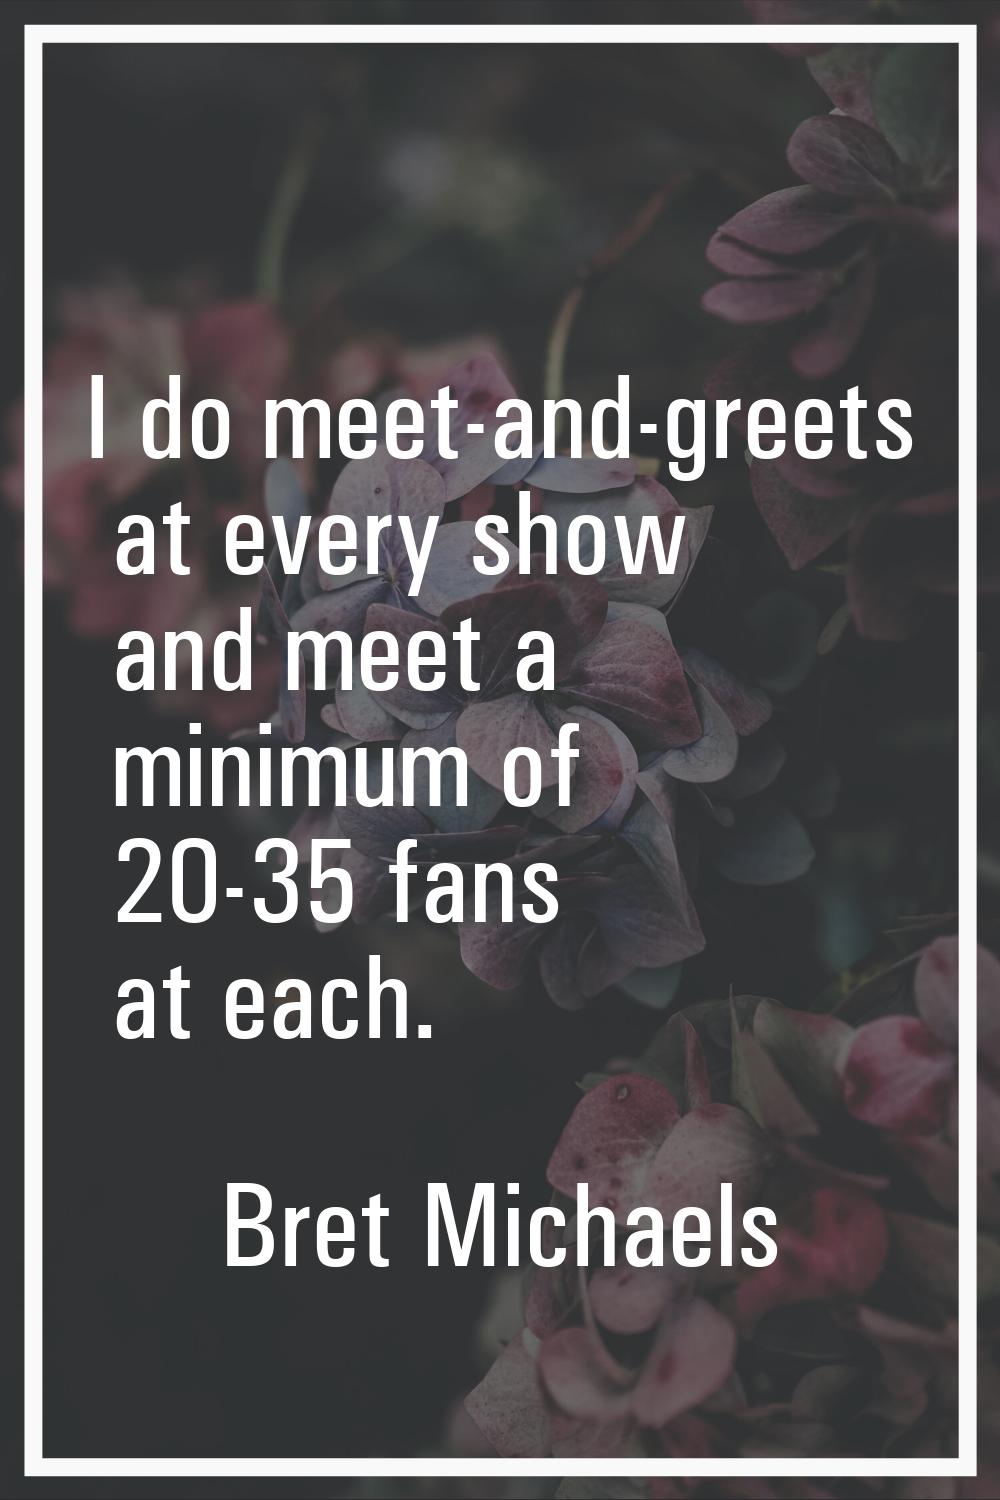 I do meet-and-greets at every show and meet a minimum of 20-35 fans at each.